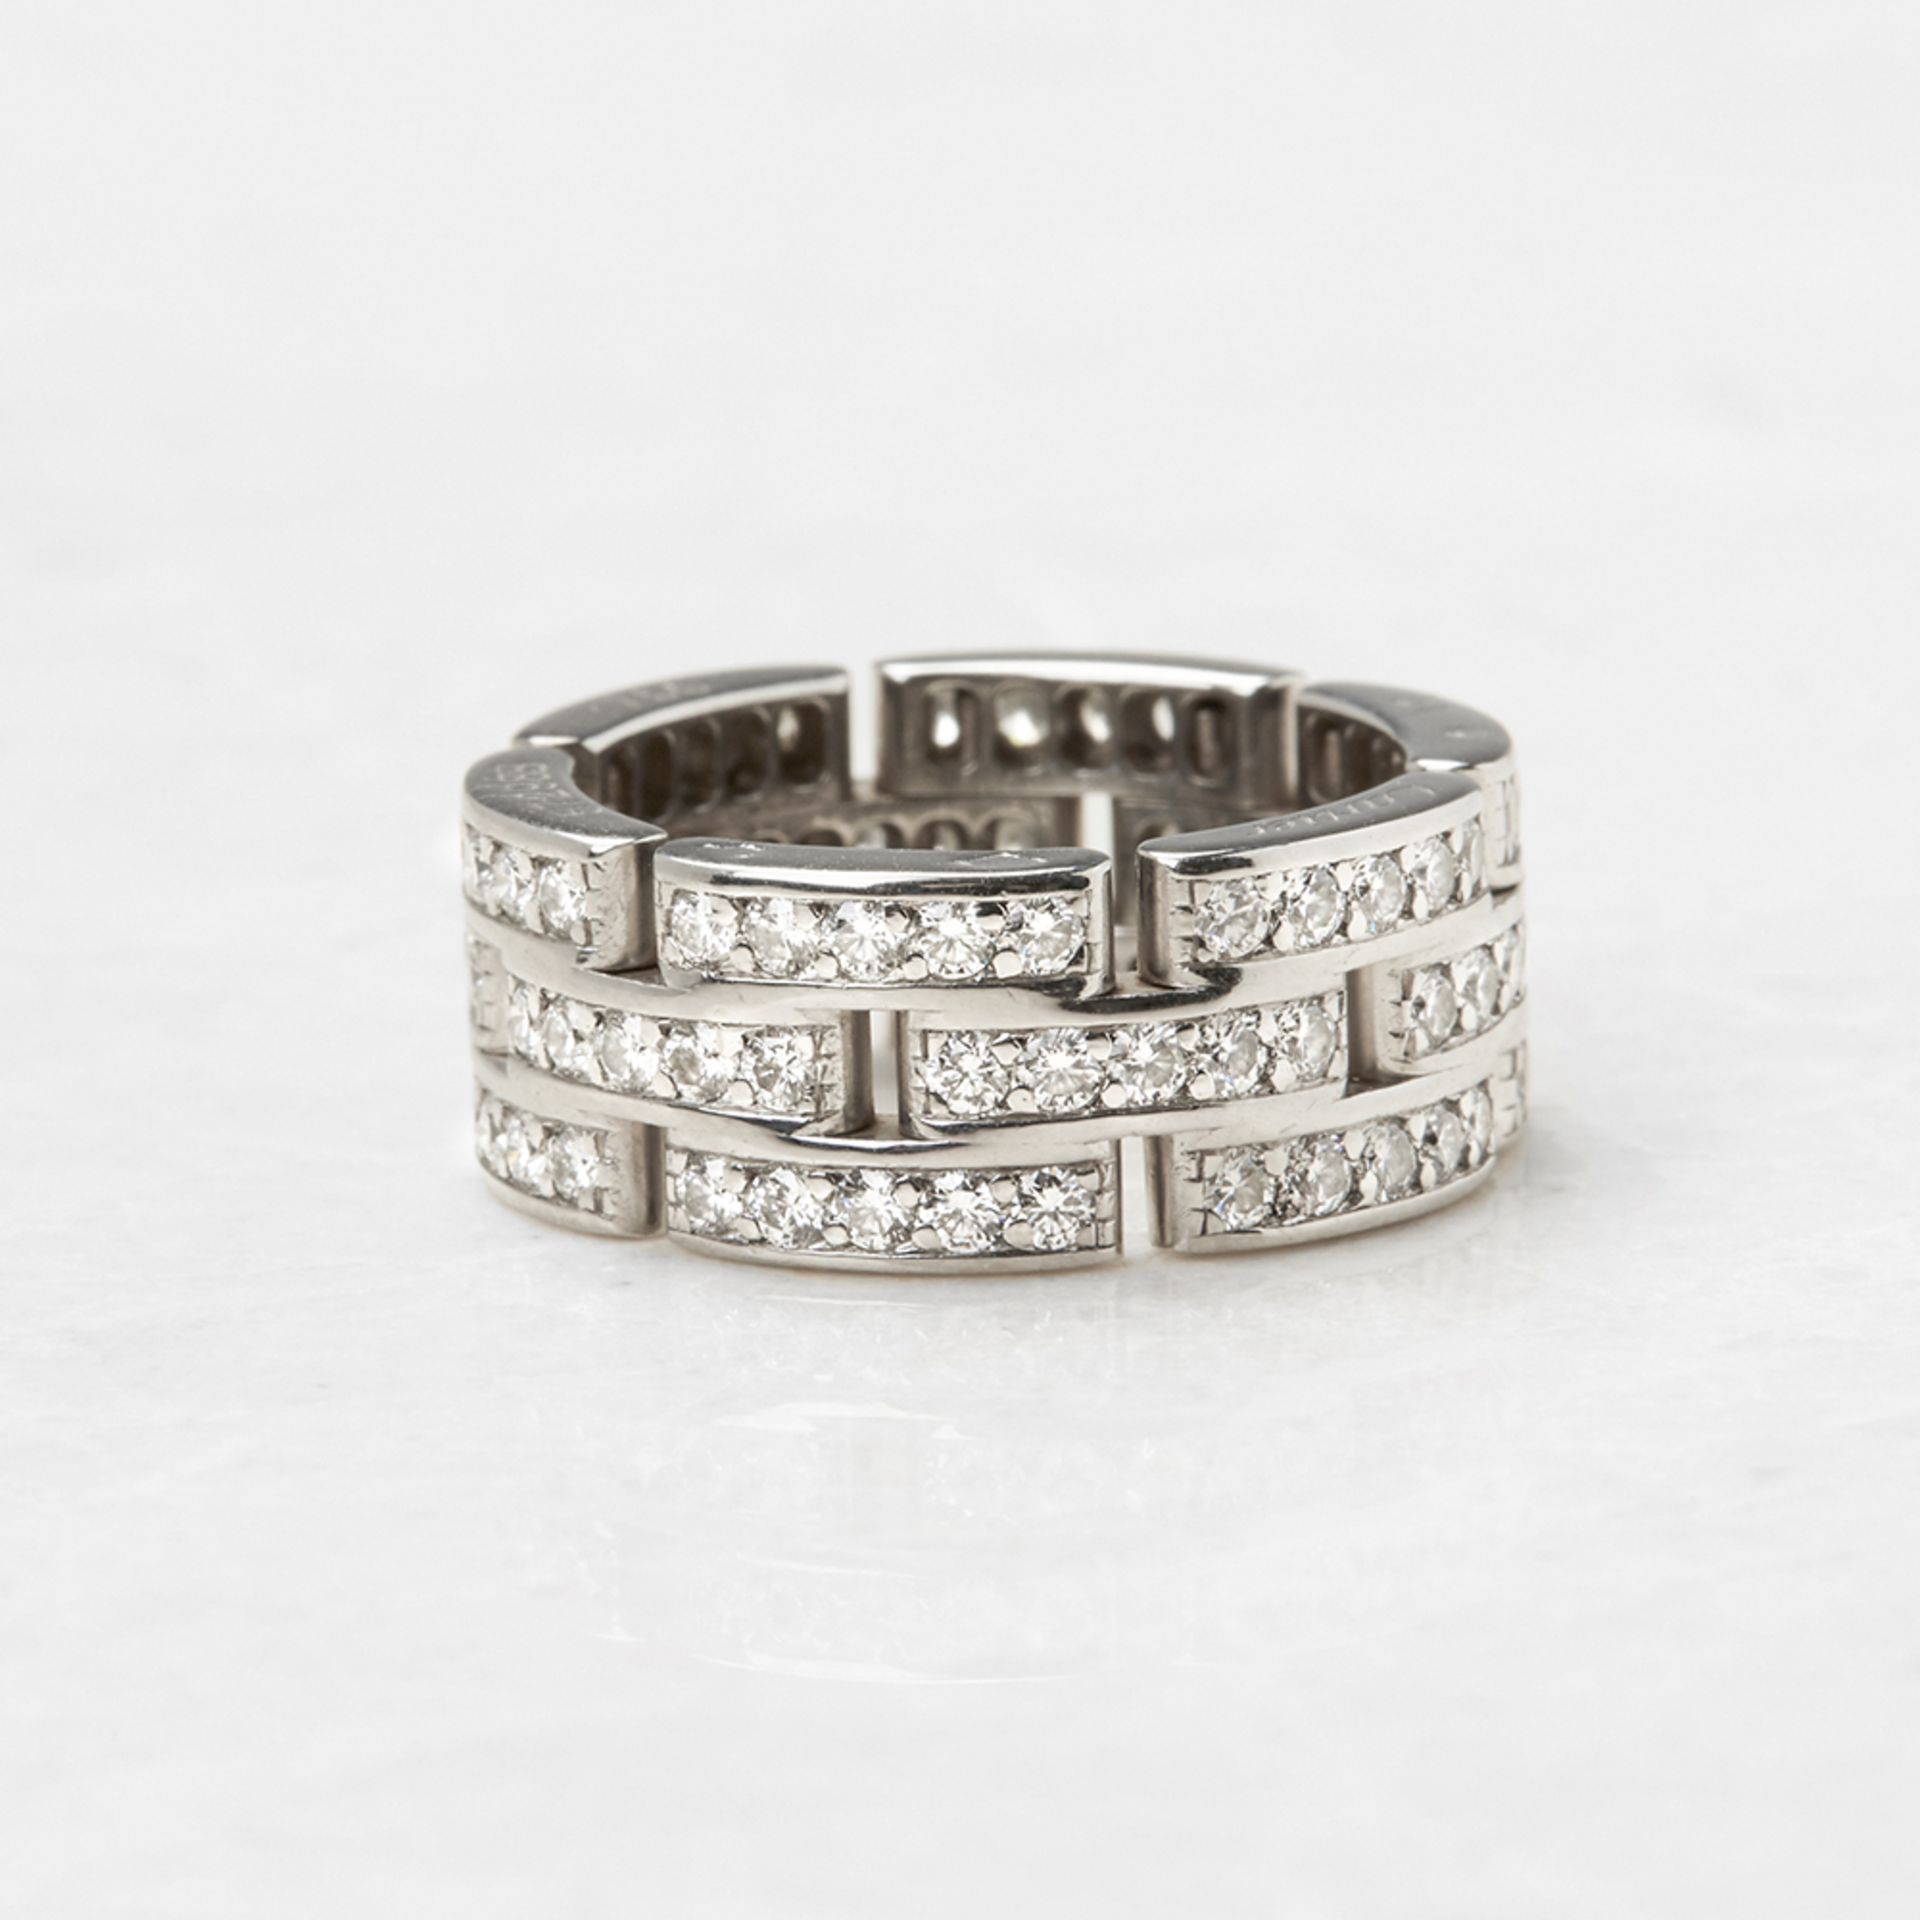 Cartier 18k White Gold Diamond Maillon Ring - Image 3 of 8